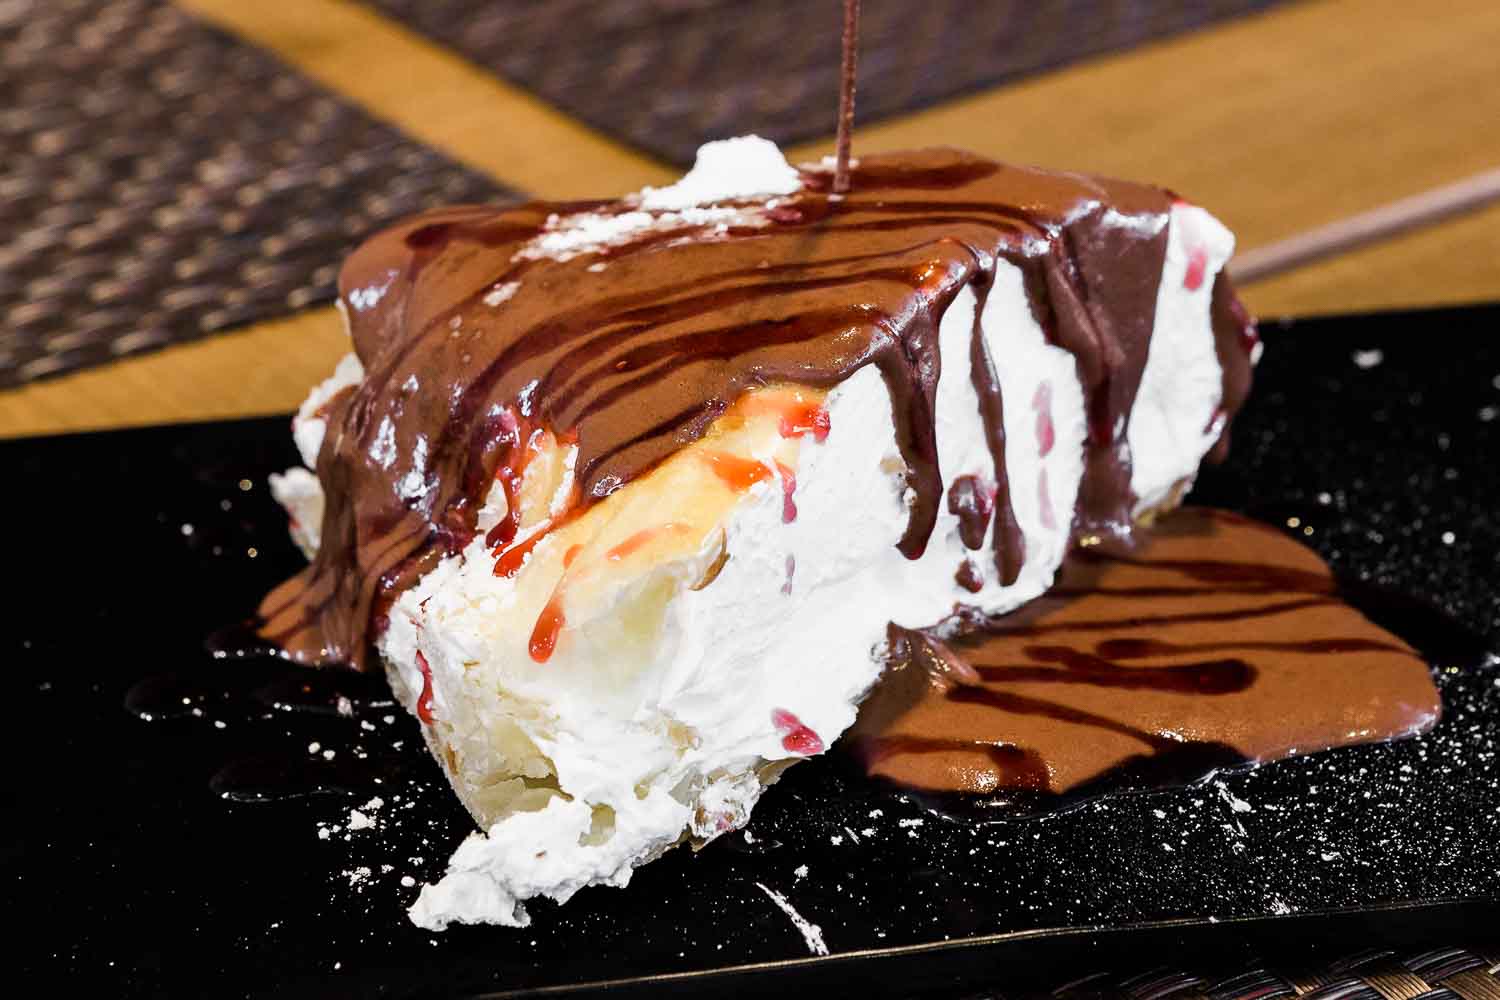 Puff pastry with cream and chocolate